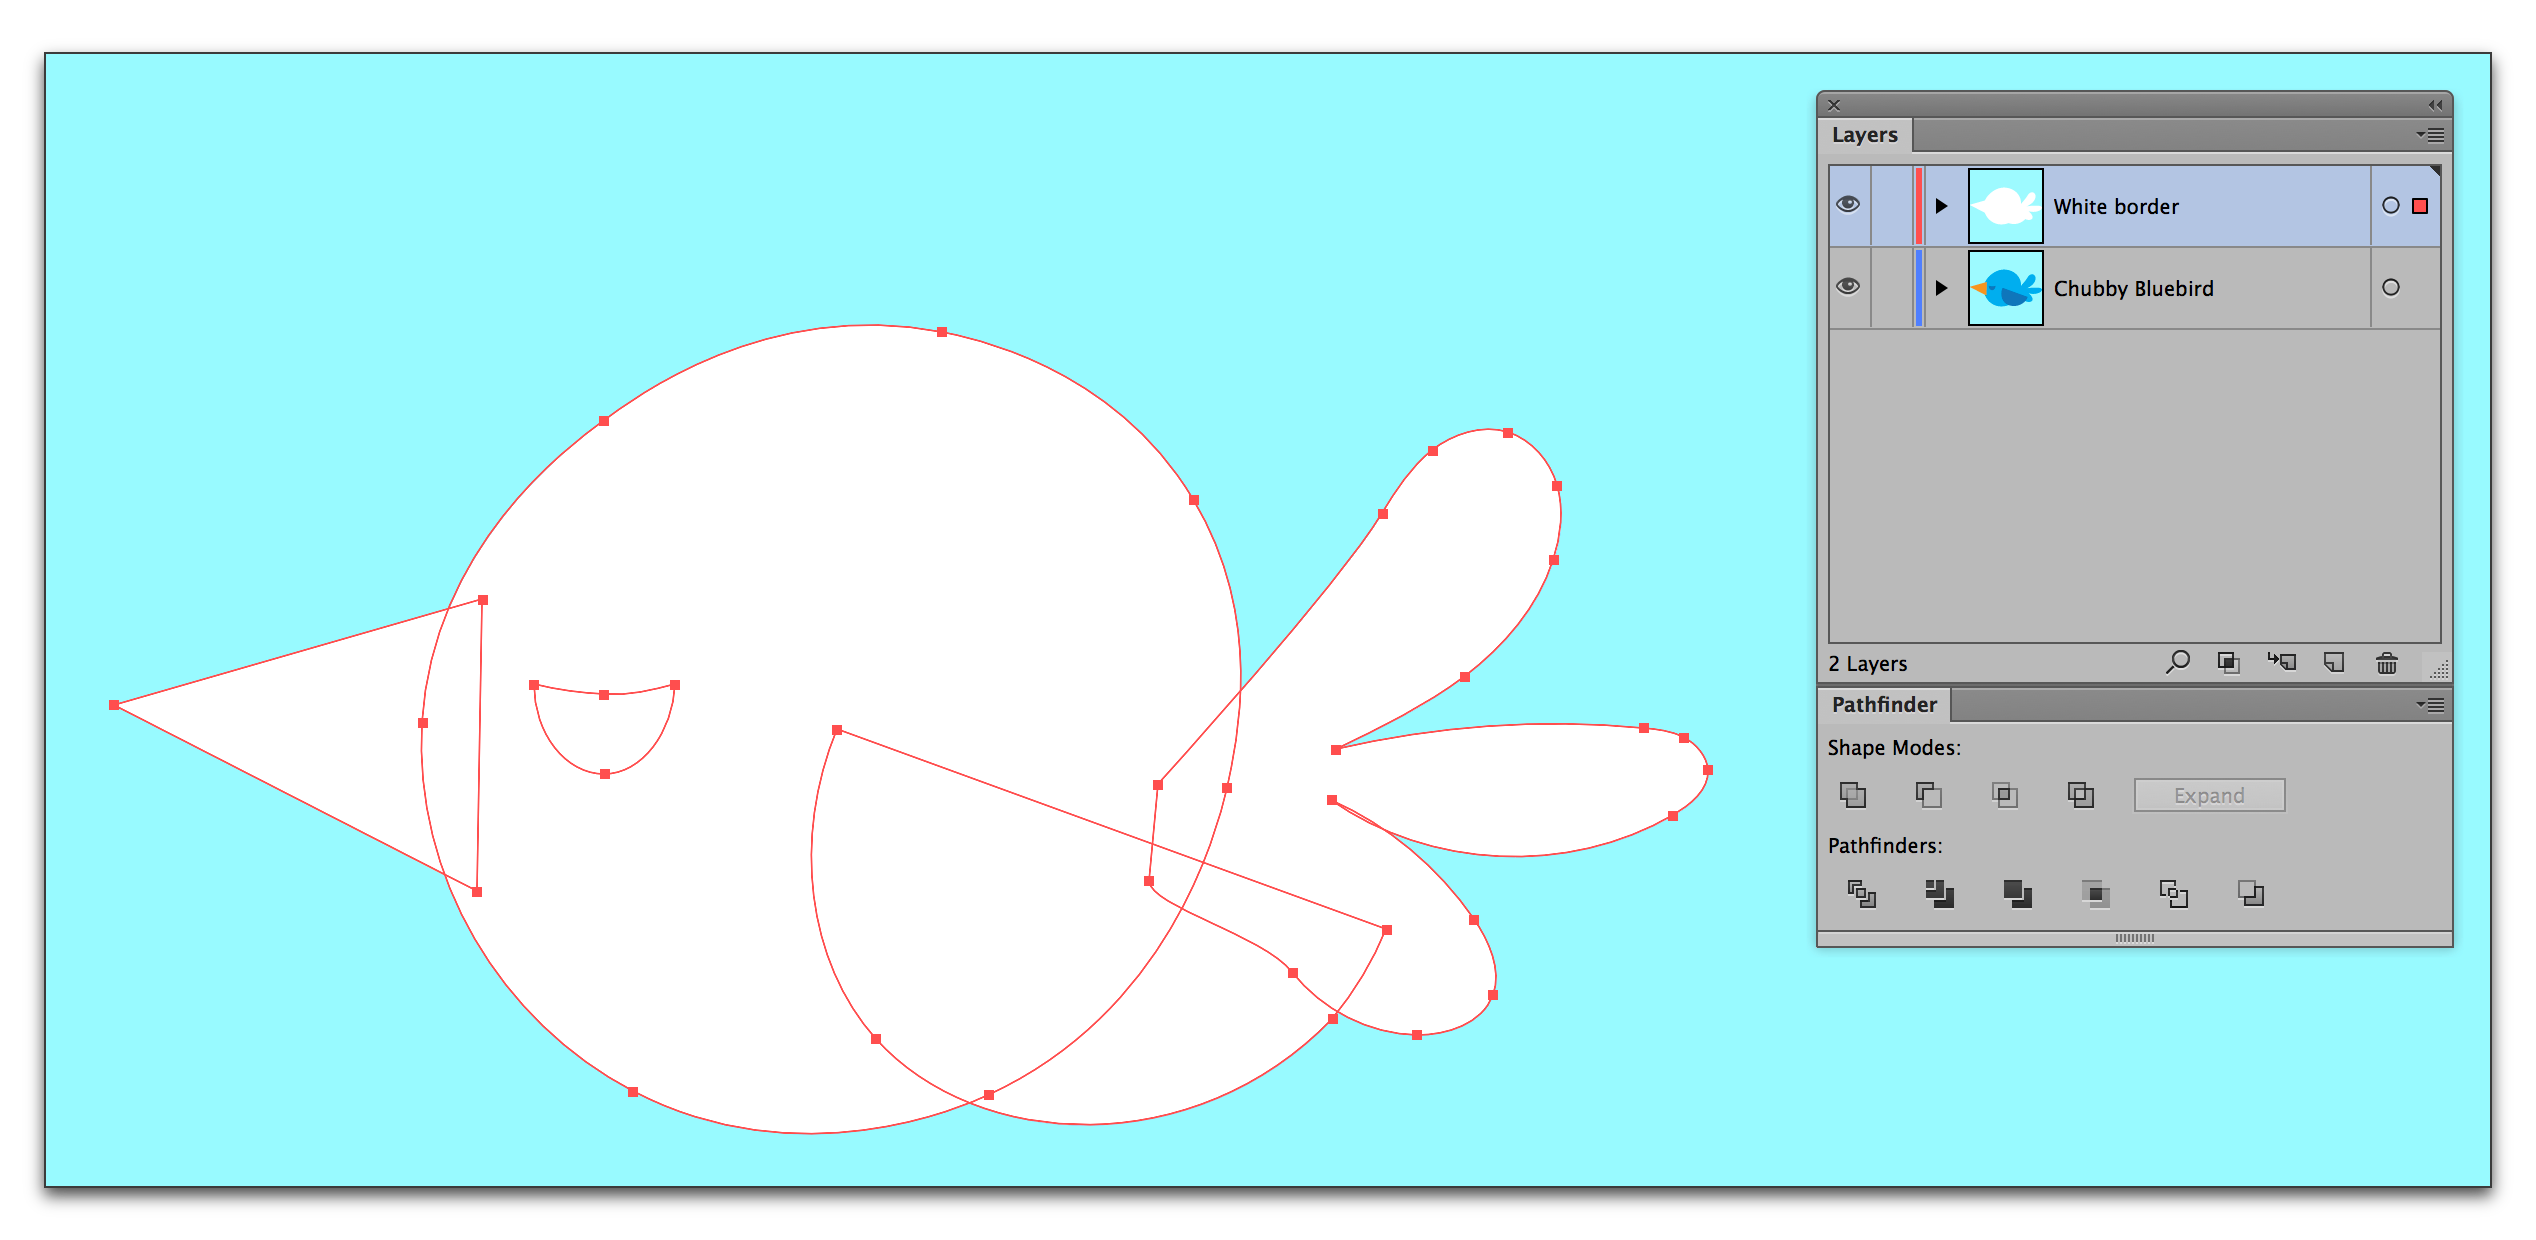 Adobe Illustrator CC 2015: Adding a white border for stickers and window clings